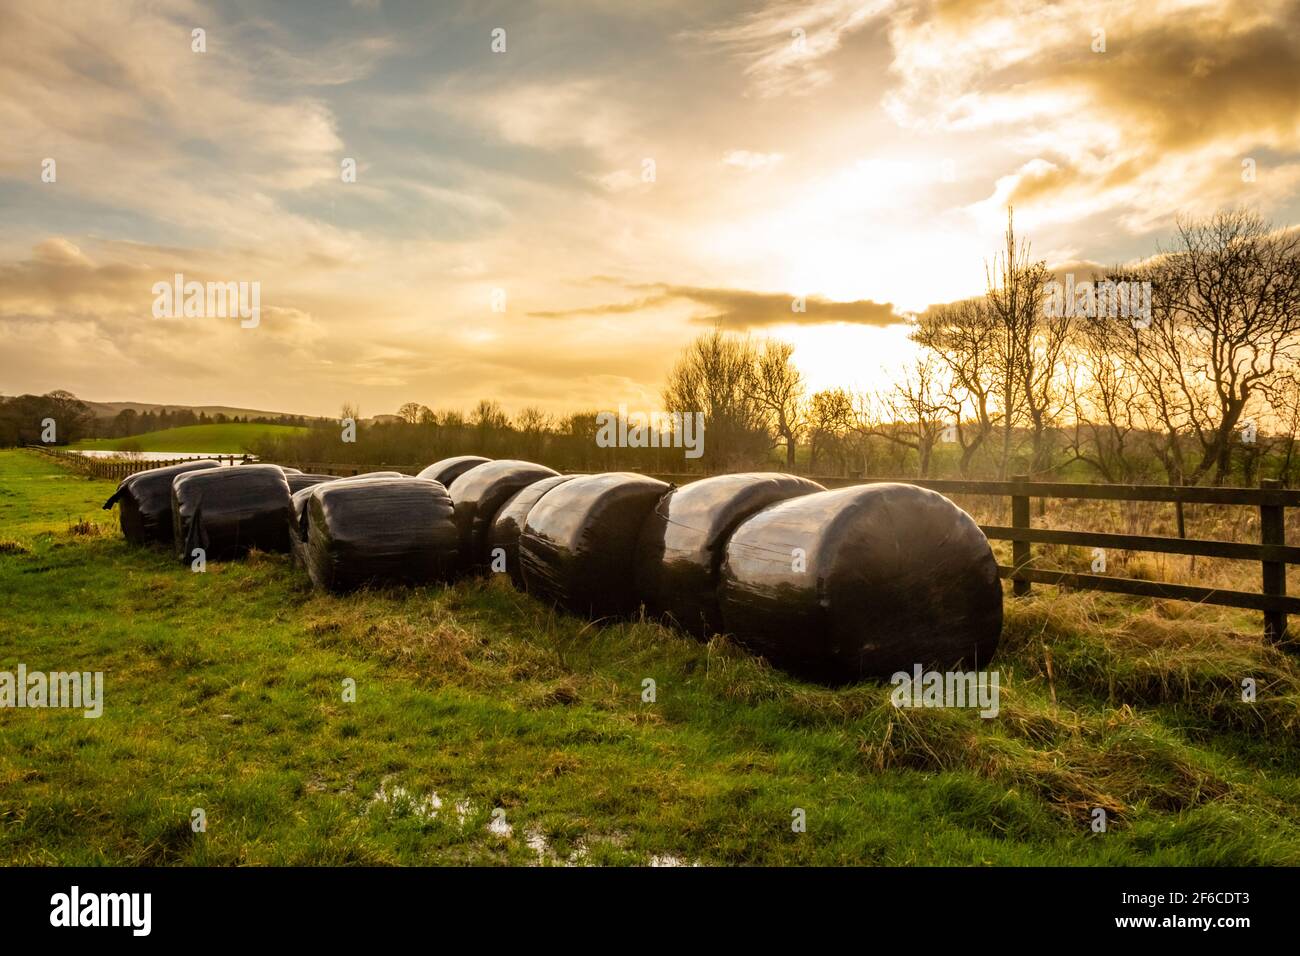 Silage bales beside a wooden fence in a green field, at sunset on a cloudy winter afternoon, Dumfries and Galloway, Scotland Stock Photo